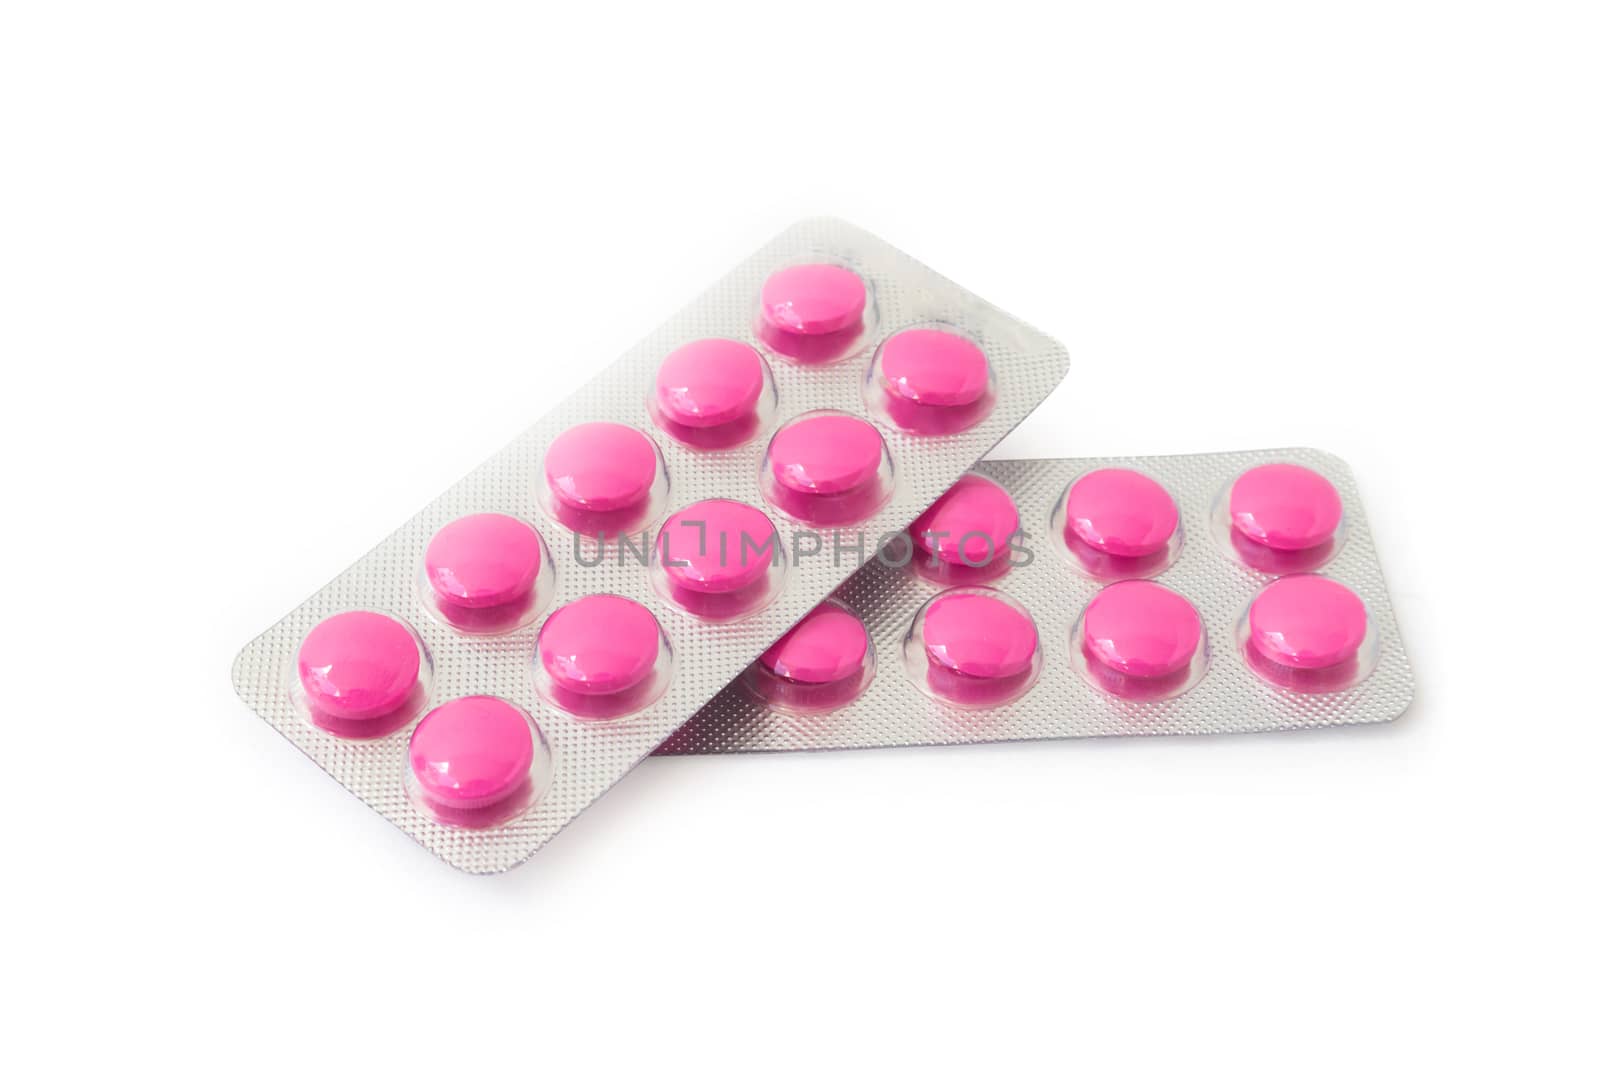 Pink pills in blister pack on white background